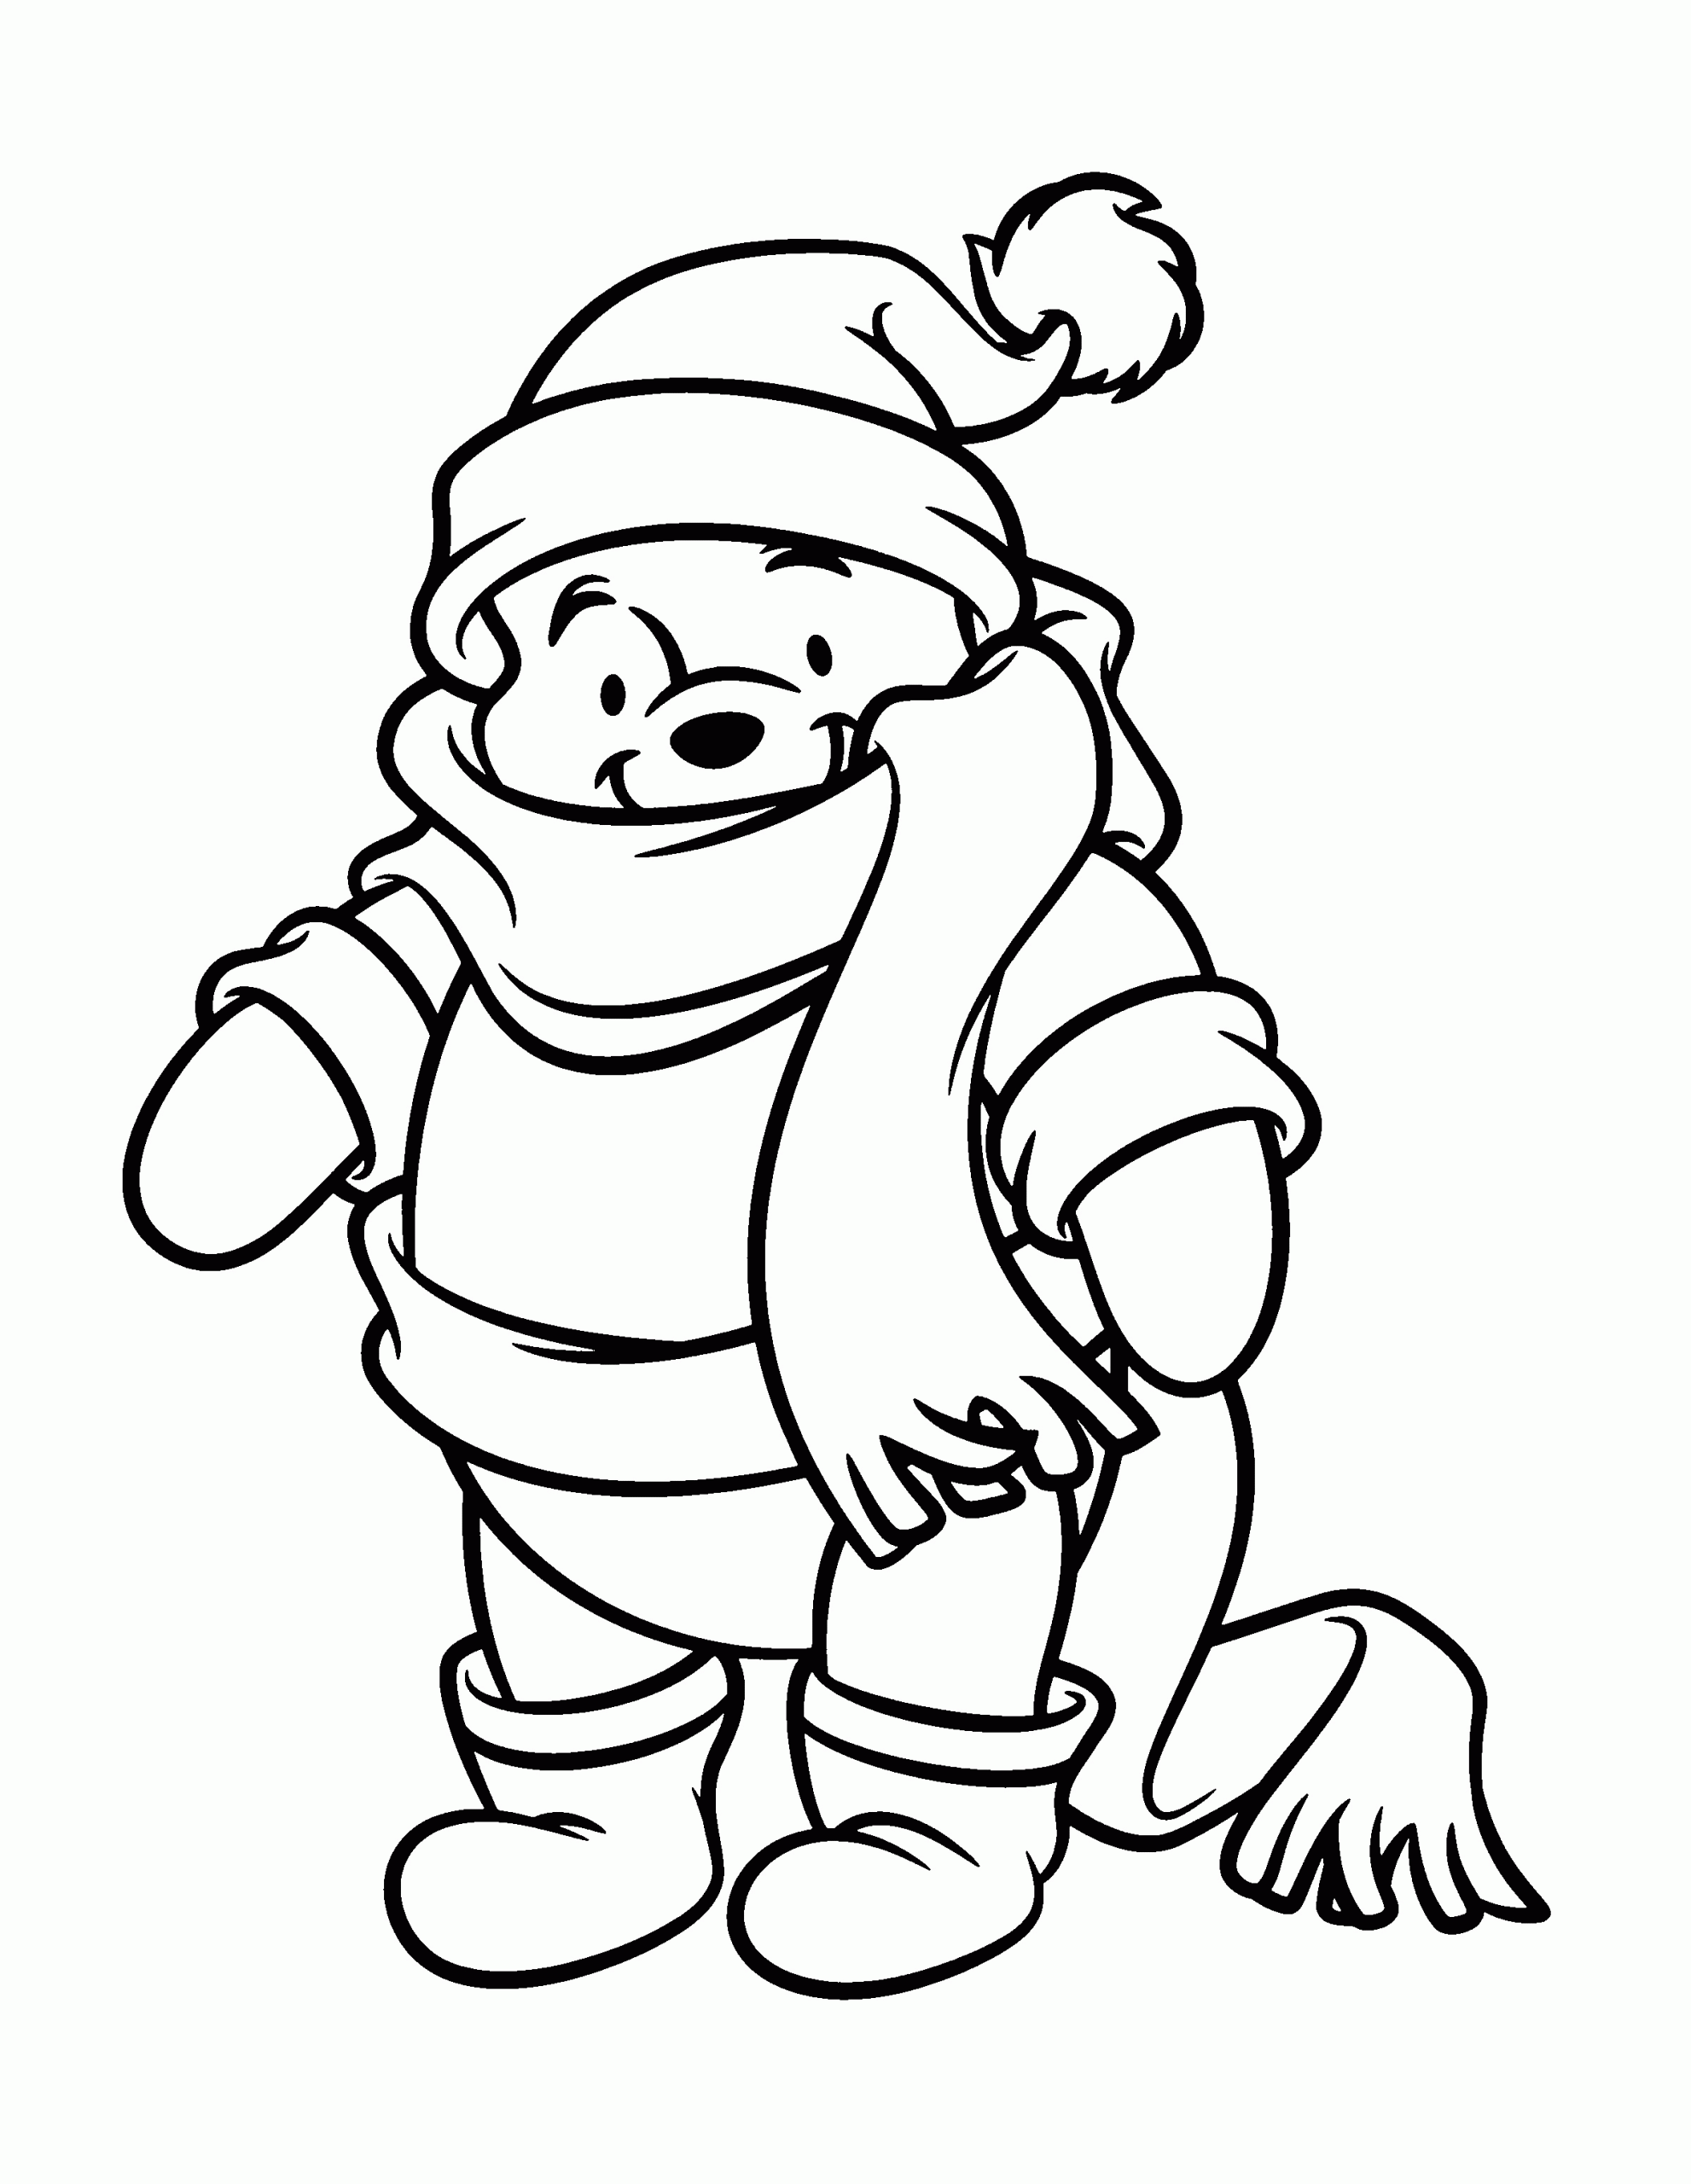 Winter Coloring Sheets For Kids
 Free Printable Winter Coloring Pages For Kids